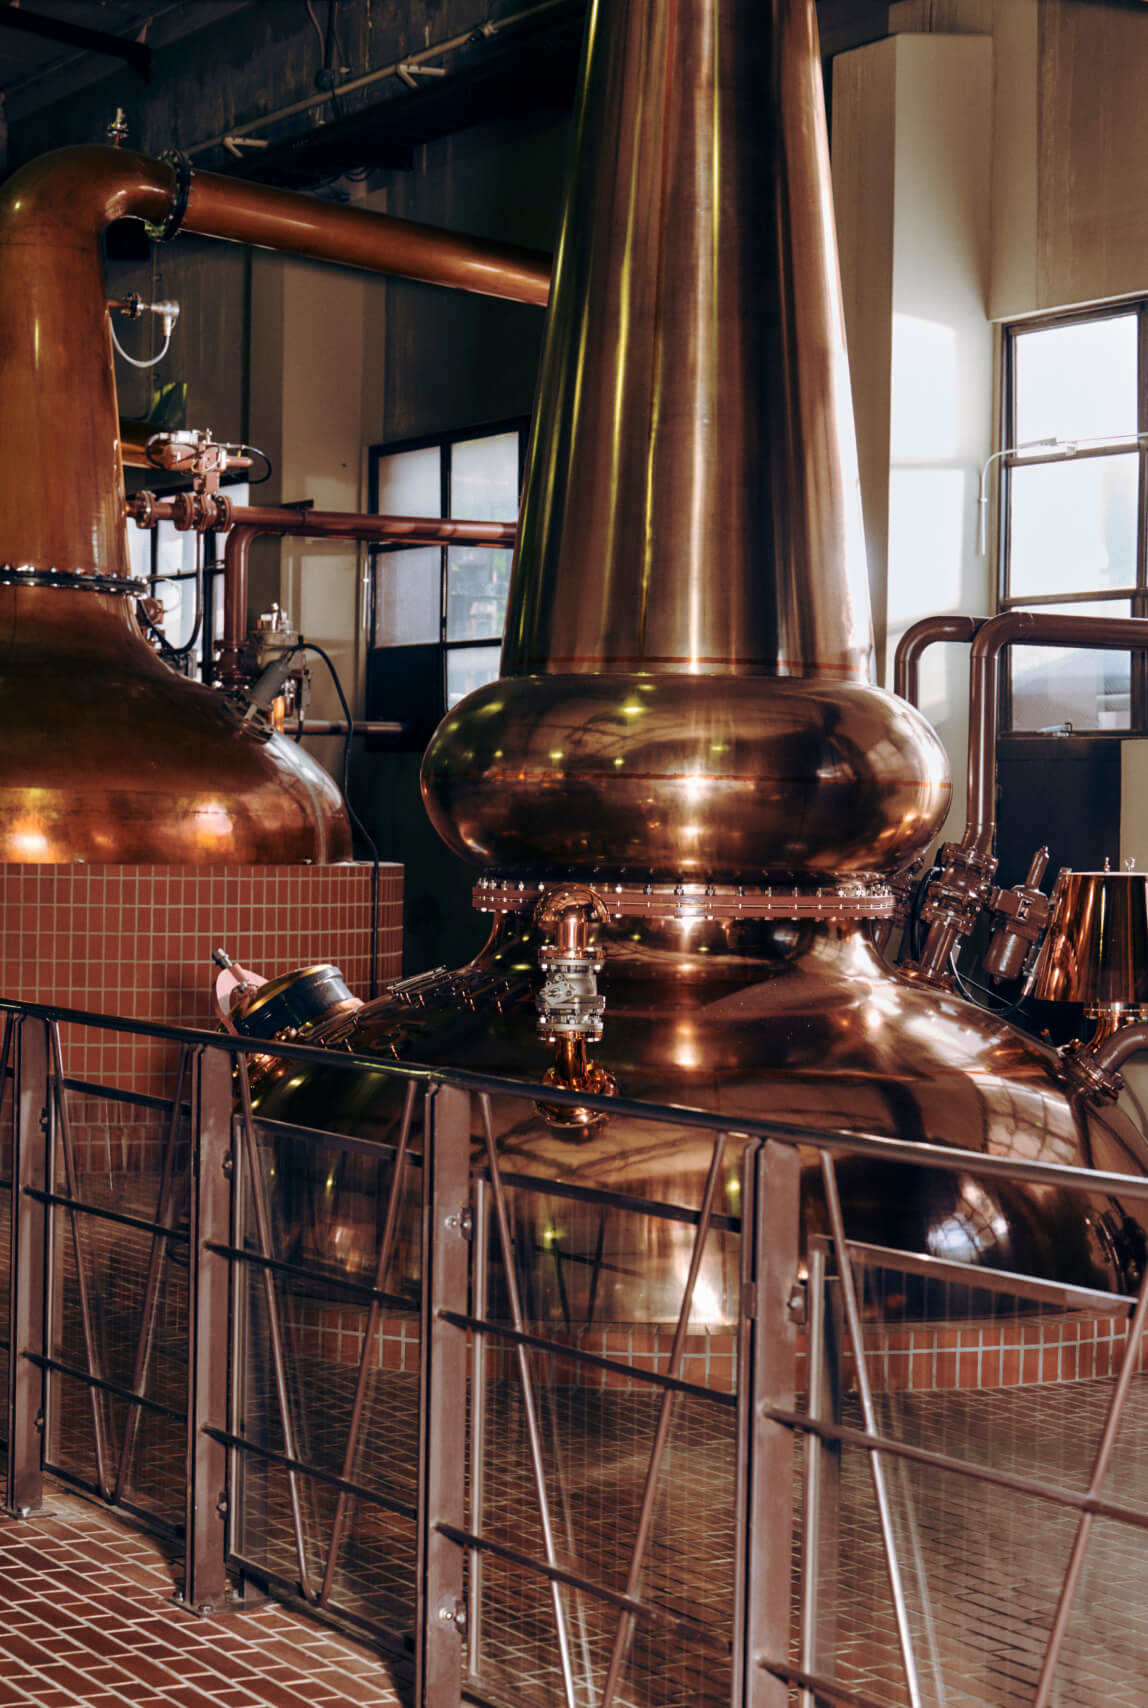 Photo of copper stills, where the whisky is distilled, at the Yamazaki Distillery